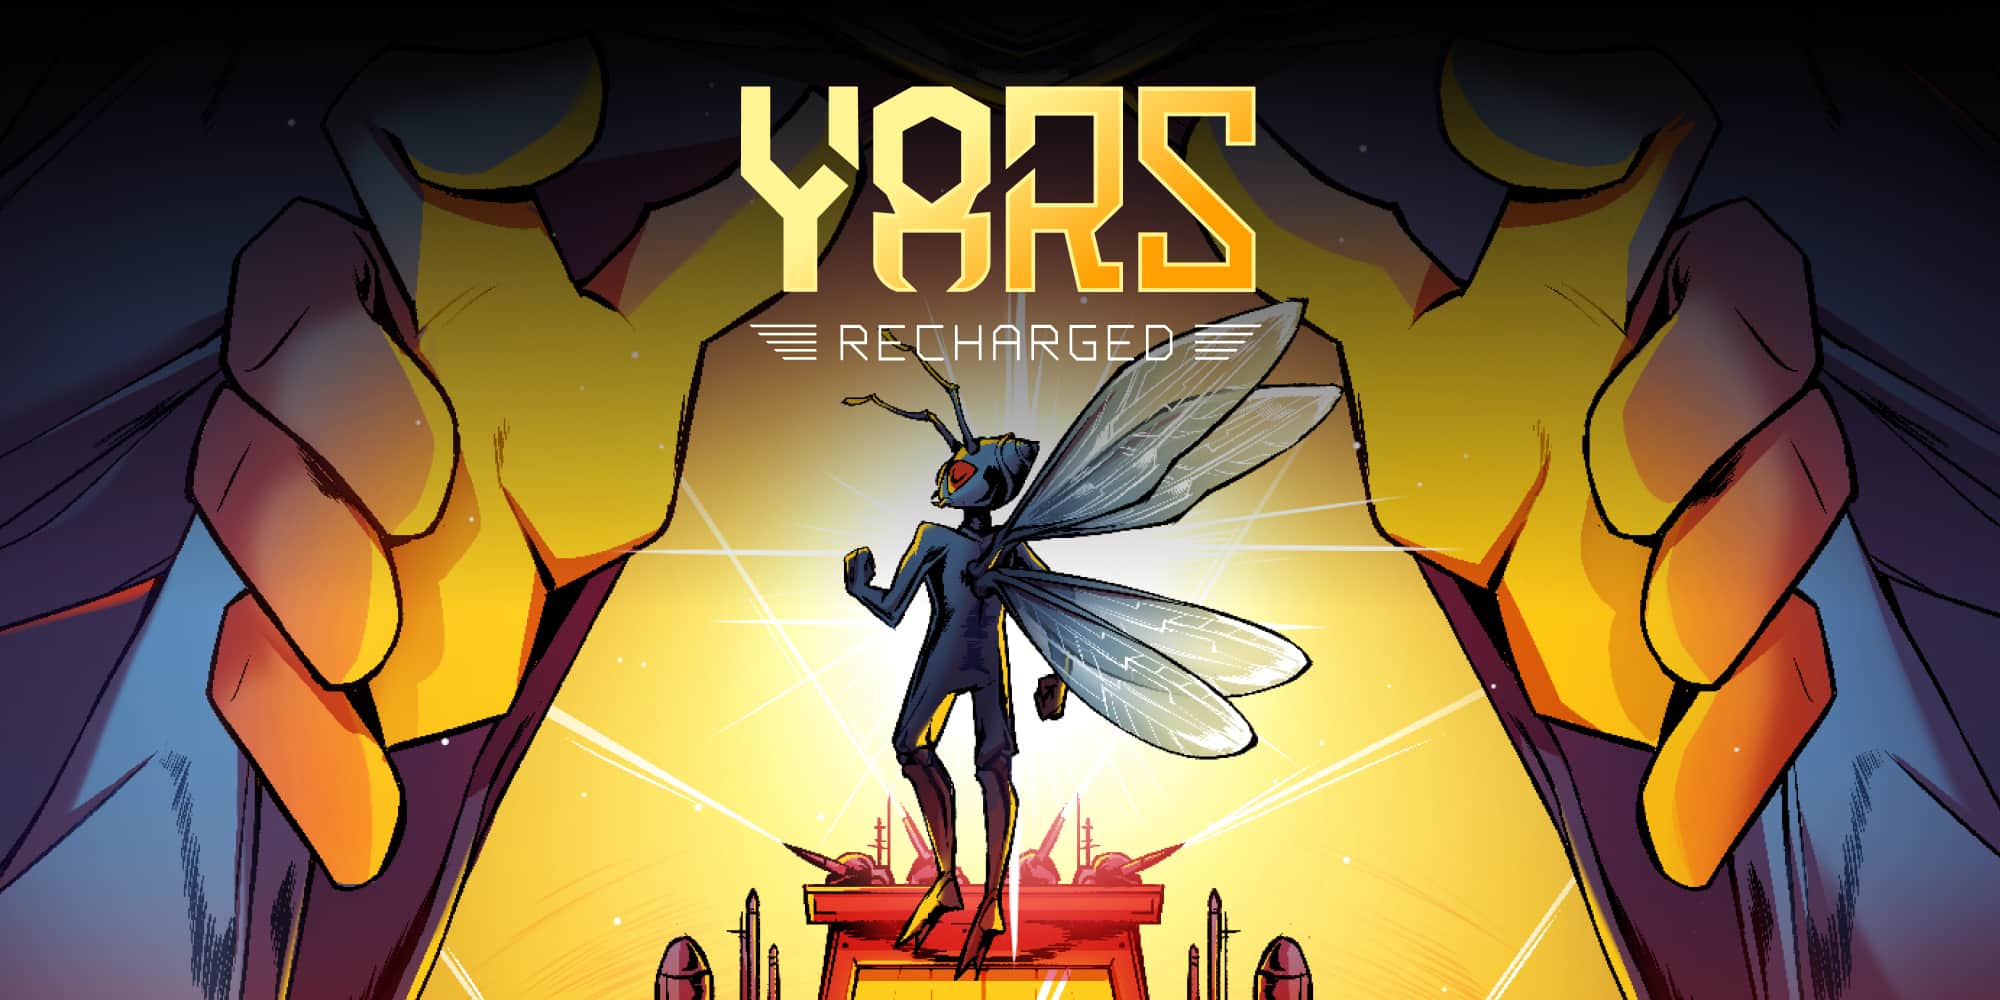 Yars Recharged recensione